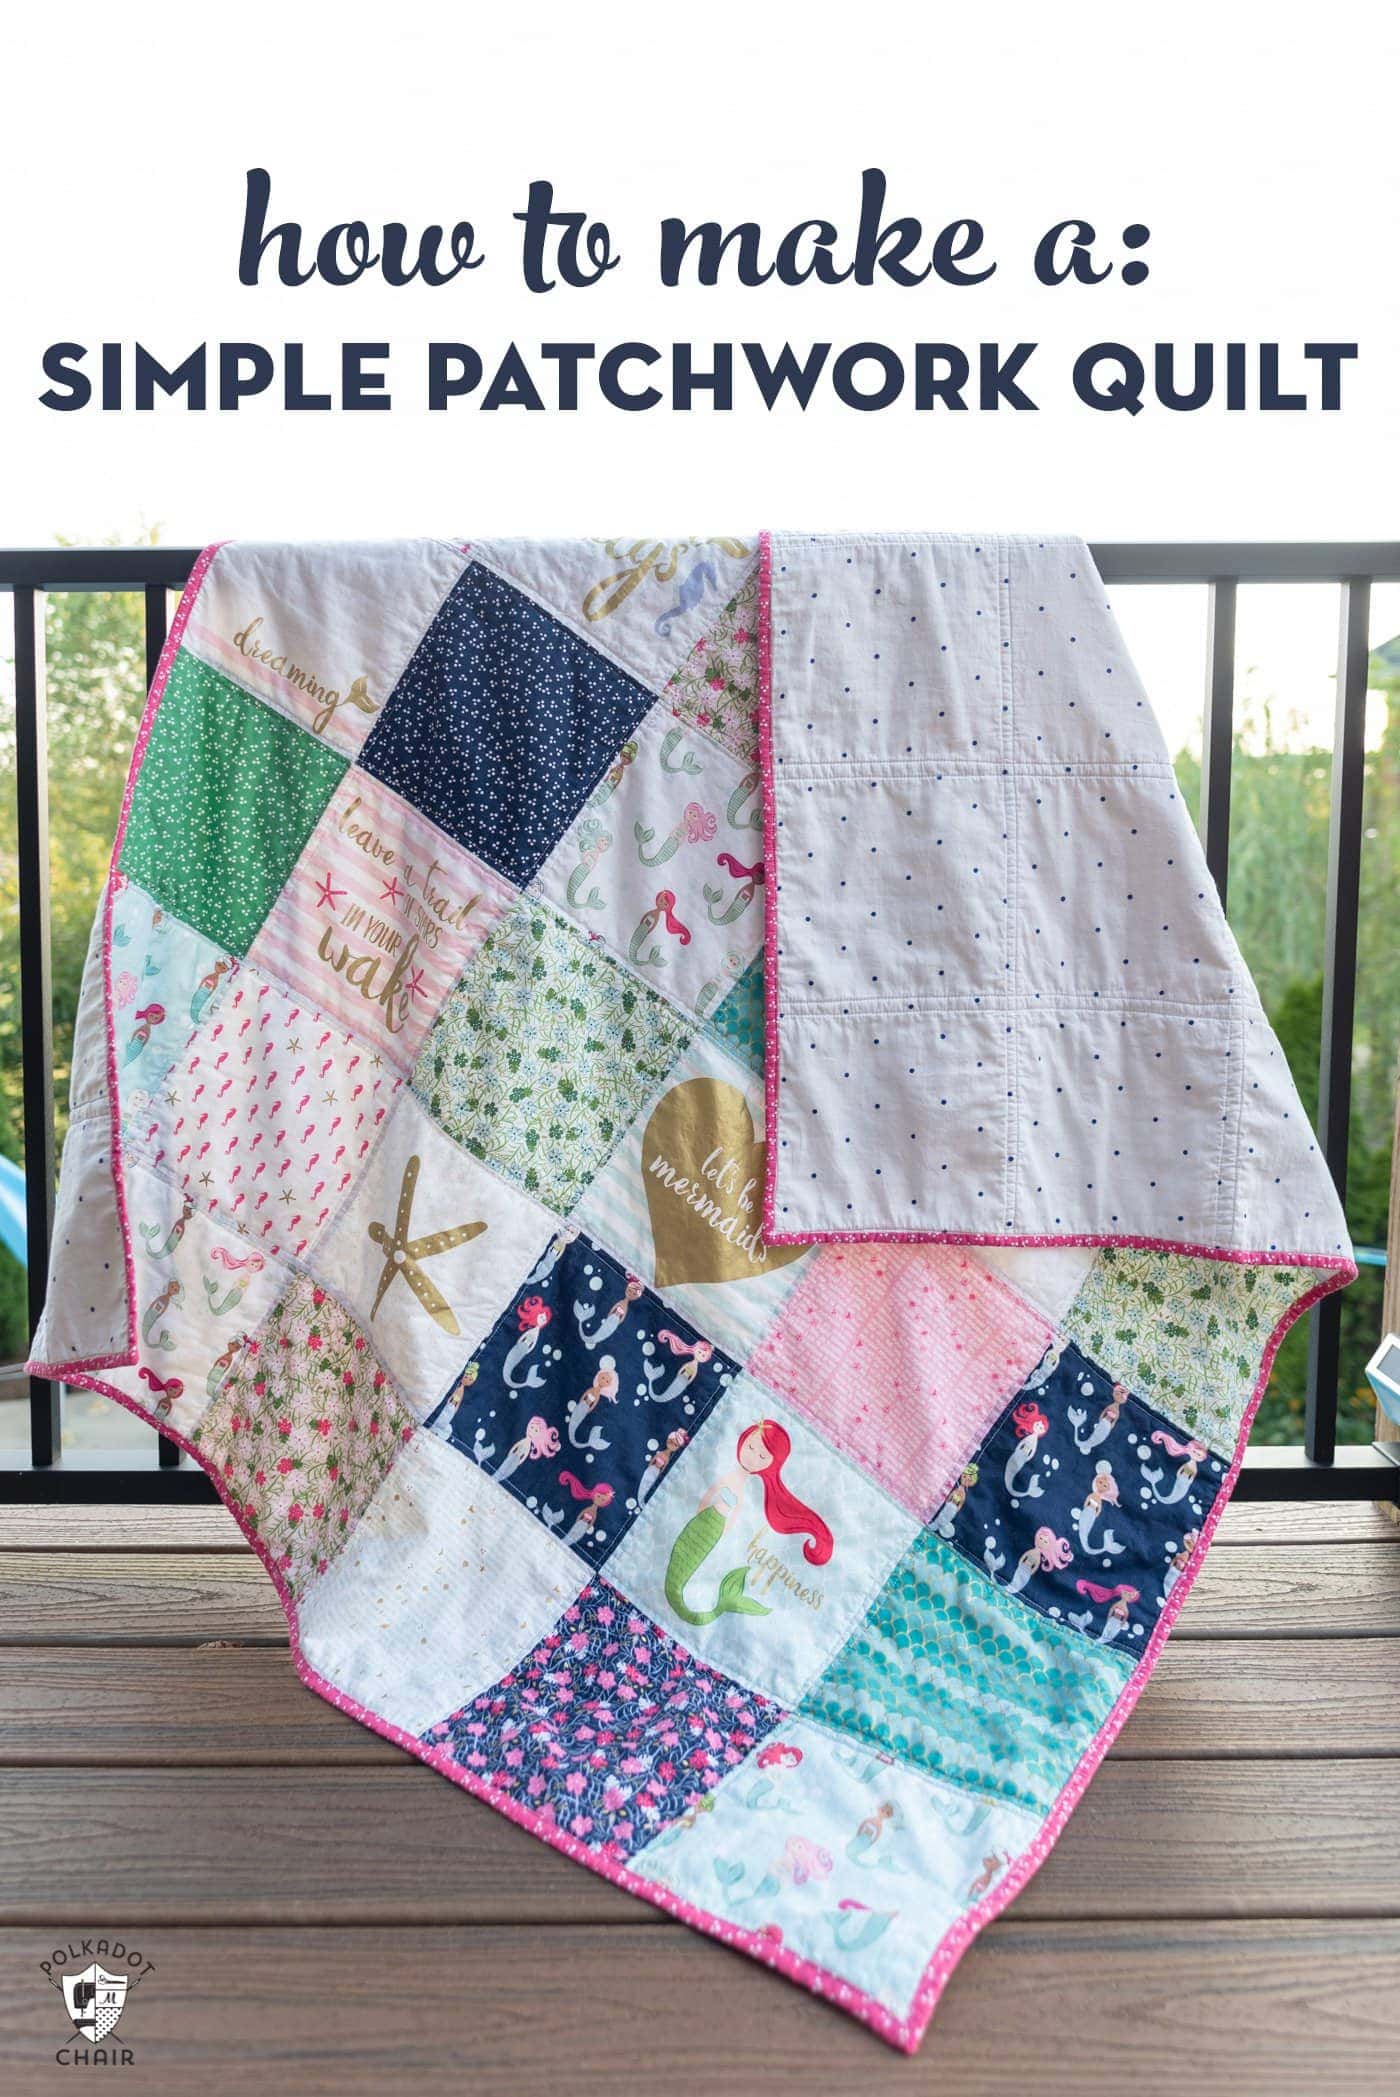 What All Do You Need To Make A Miniature Quilt?